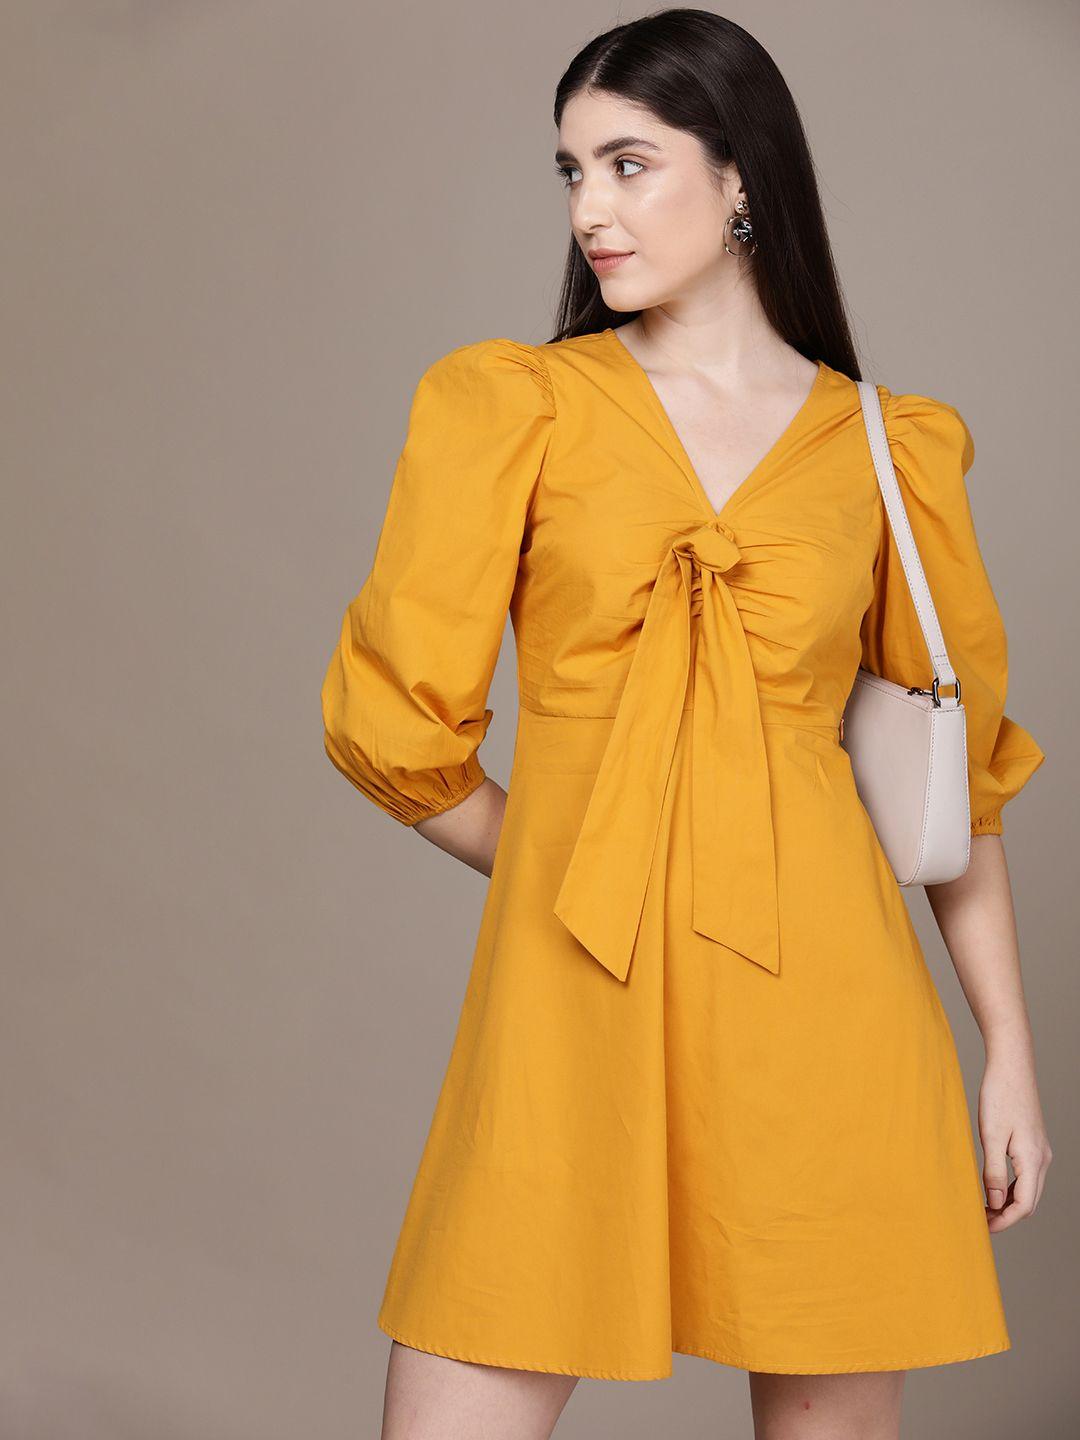 french connection v-neck puff sleeves pure cotton a-line dress